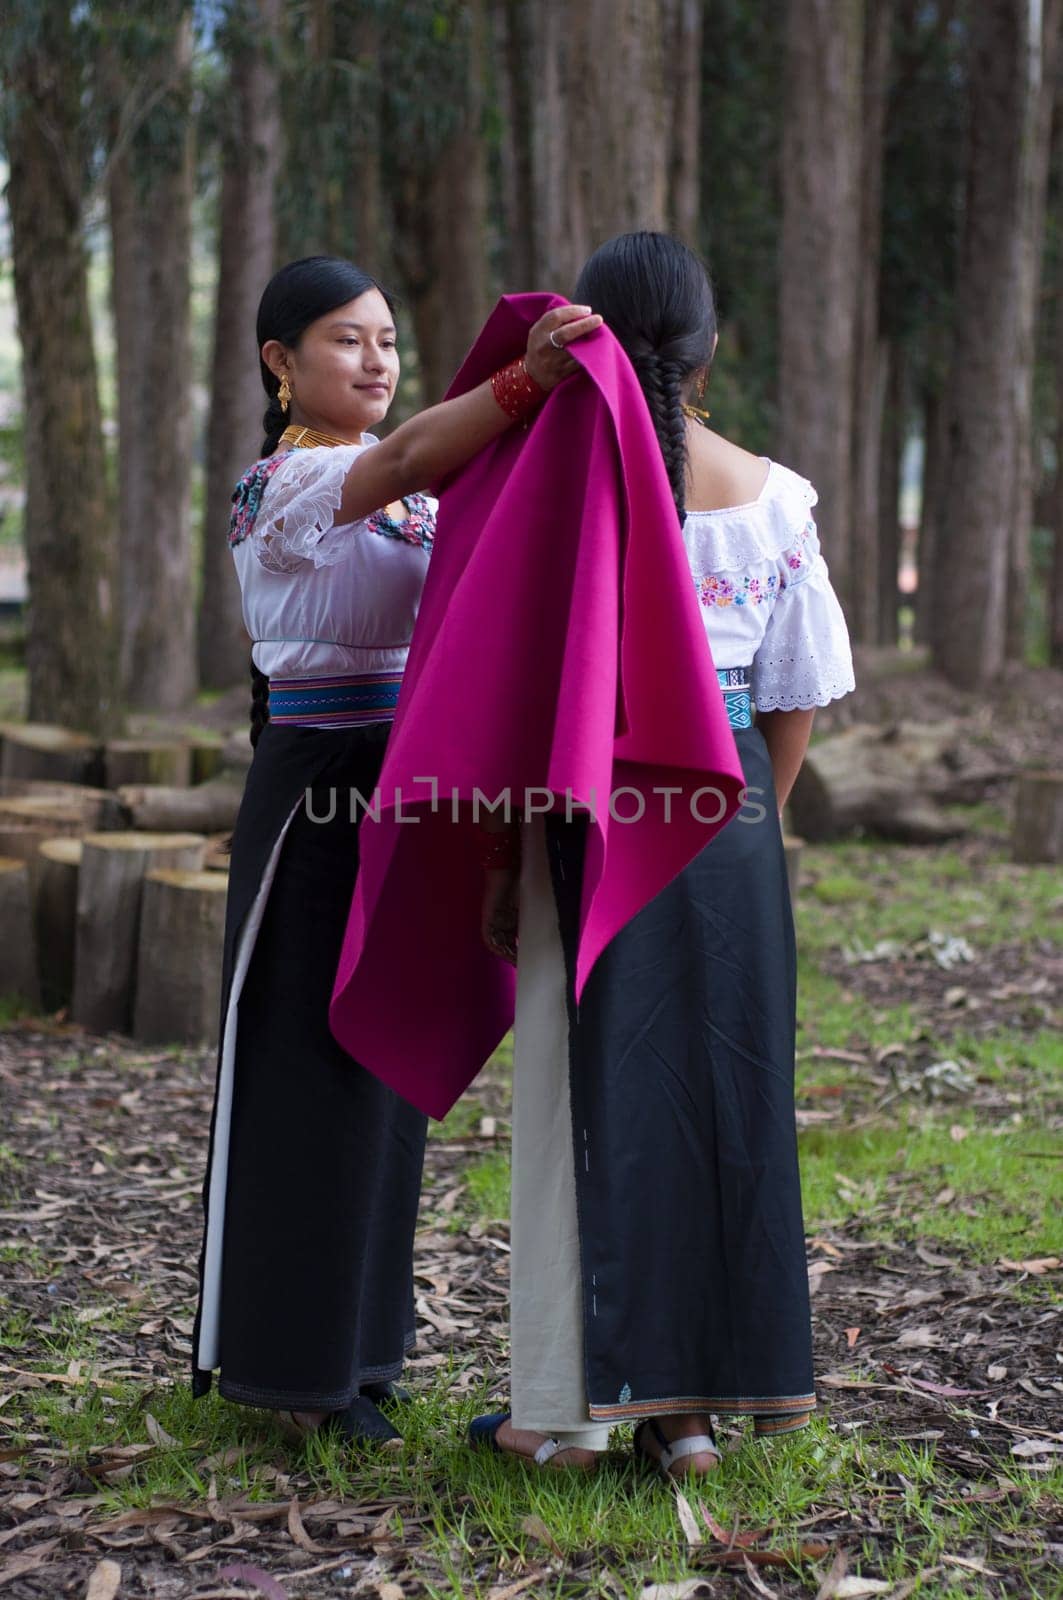 an indigenous girl tucking in a small indigenous girl in the forest of otavalo, ecuador by Raulmartin